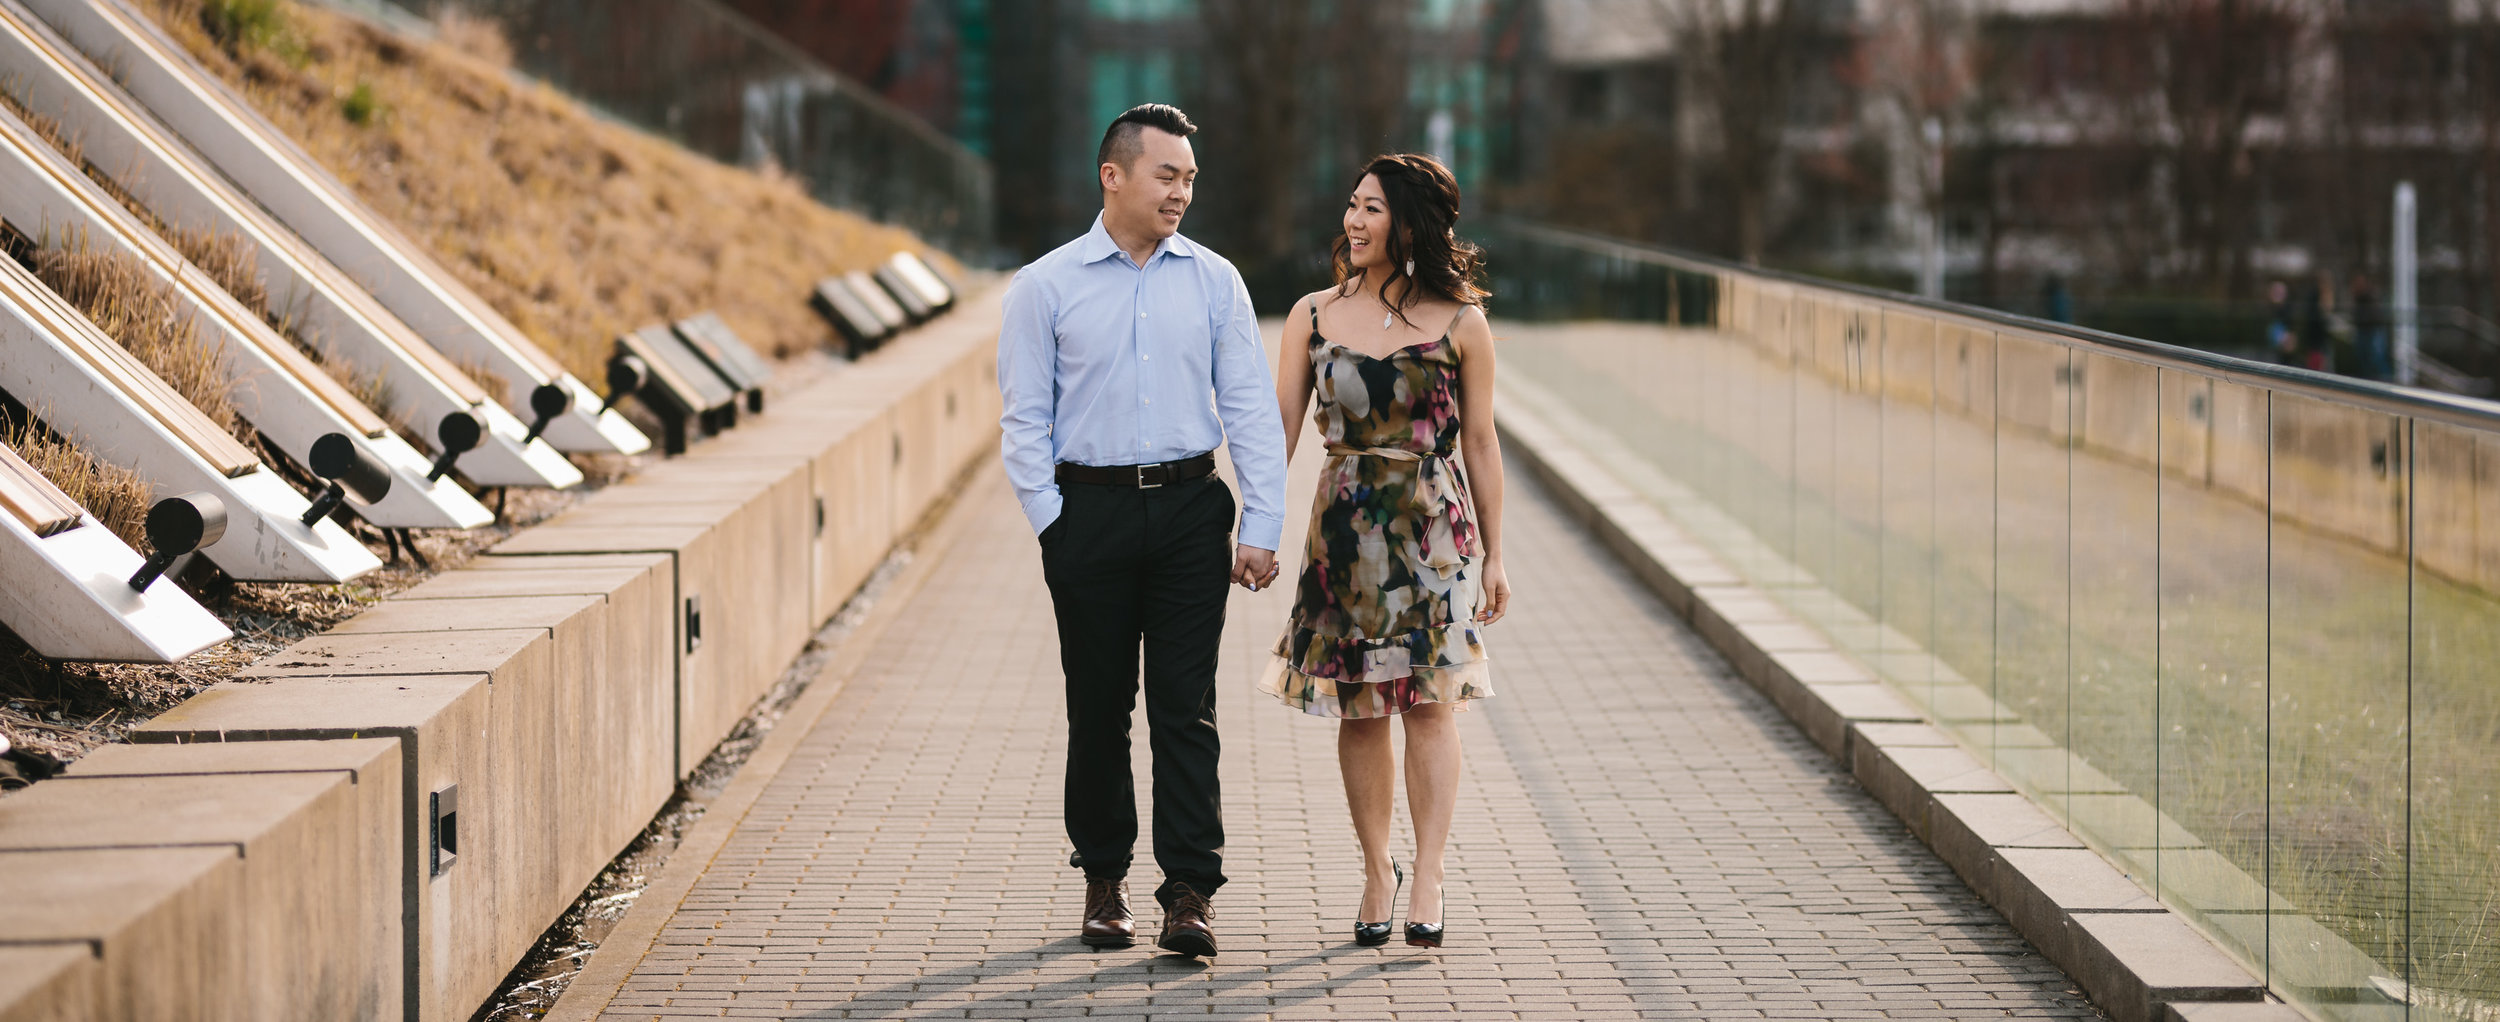 vancouver engagement photography in coal harbour during sunset in spring